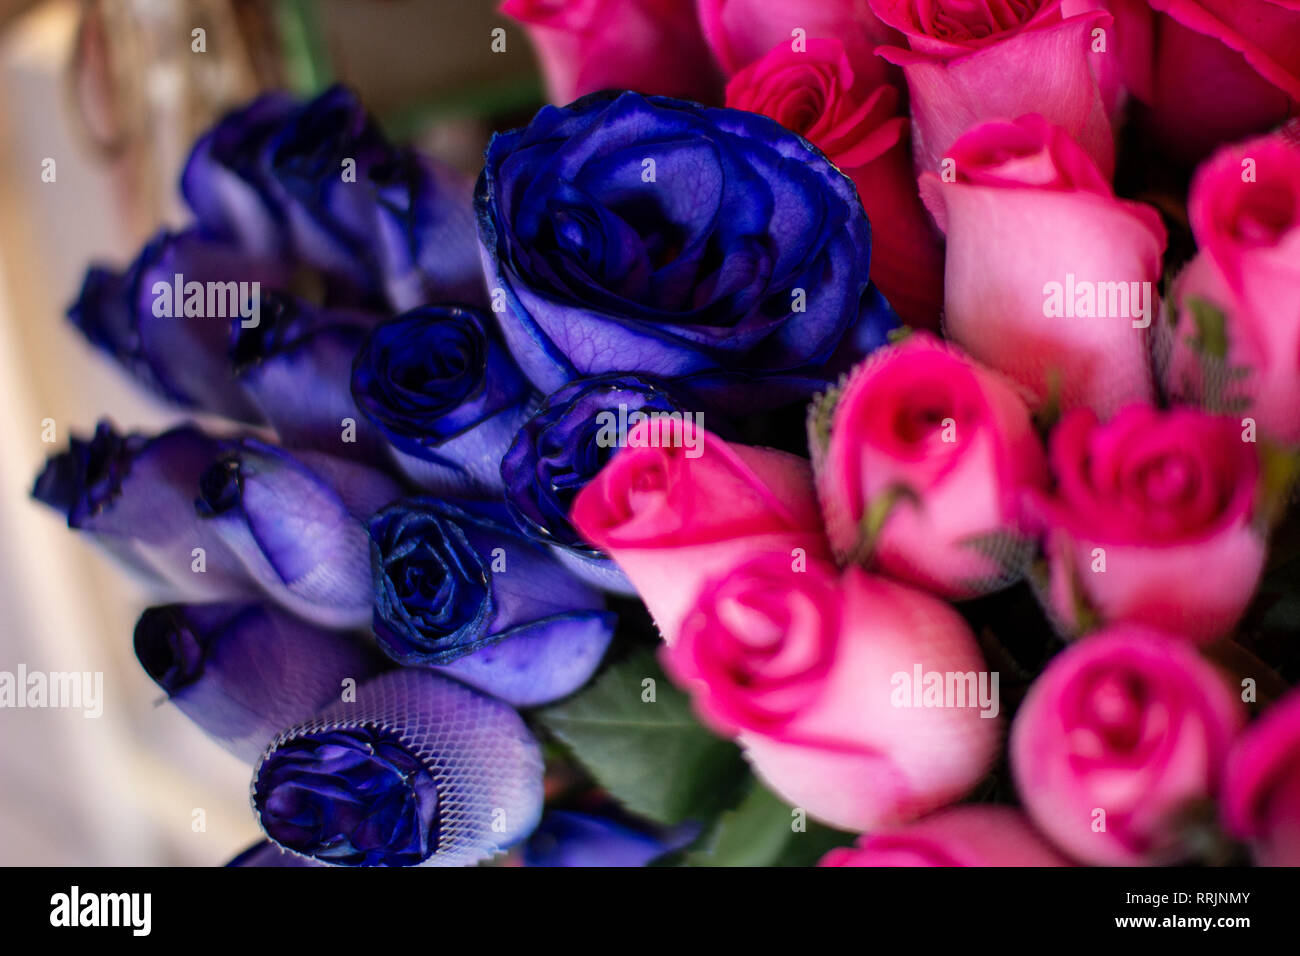 Colorful natural fresh blue and pink roses at florist shop Stock Photo